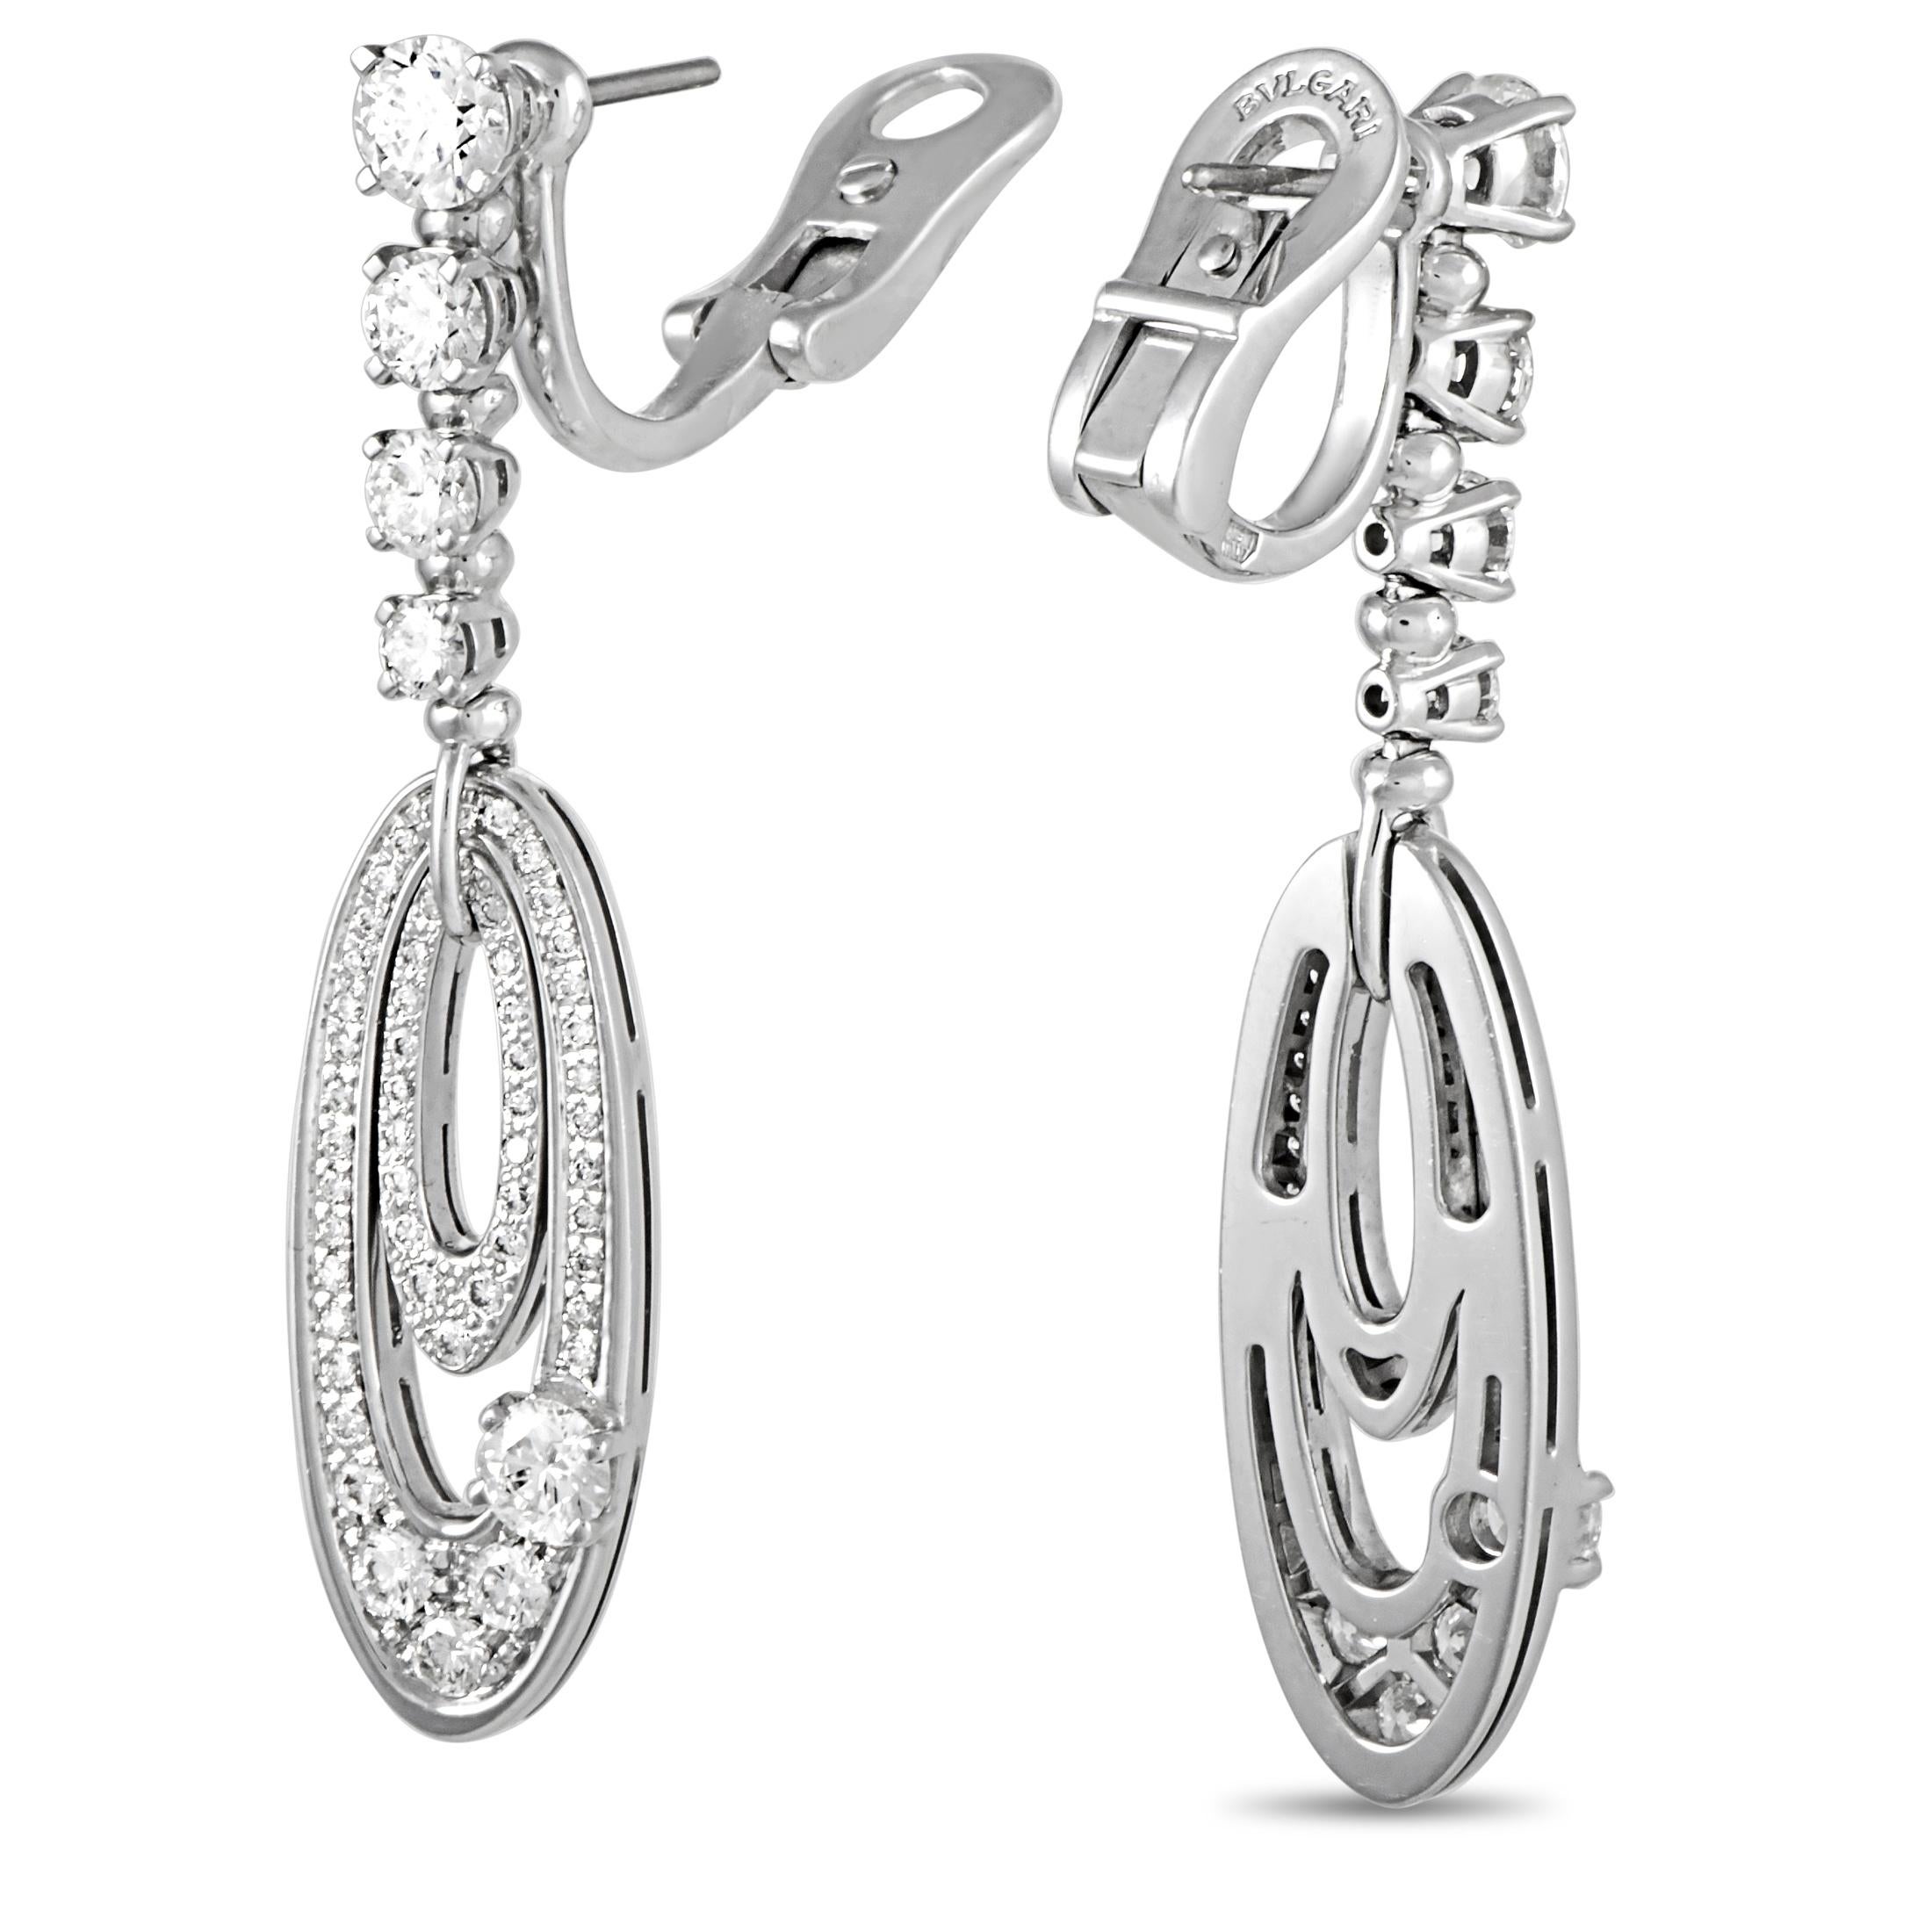 The Bvlgari “Elisia” earrings are made of 18K white gold and each weighs 7.6 grams. They measure 1.80” in length and 0.40” in width. The earrings are embellished with diamonds that boast grade F color and VS1 clarity and amount to 3.00 carats.
 
